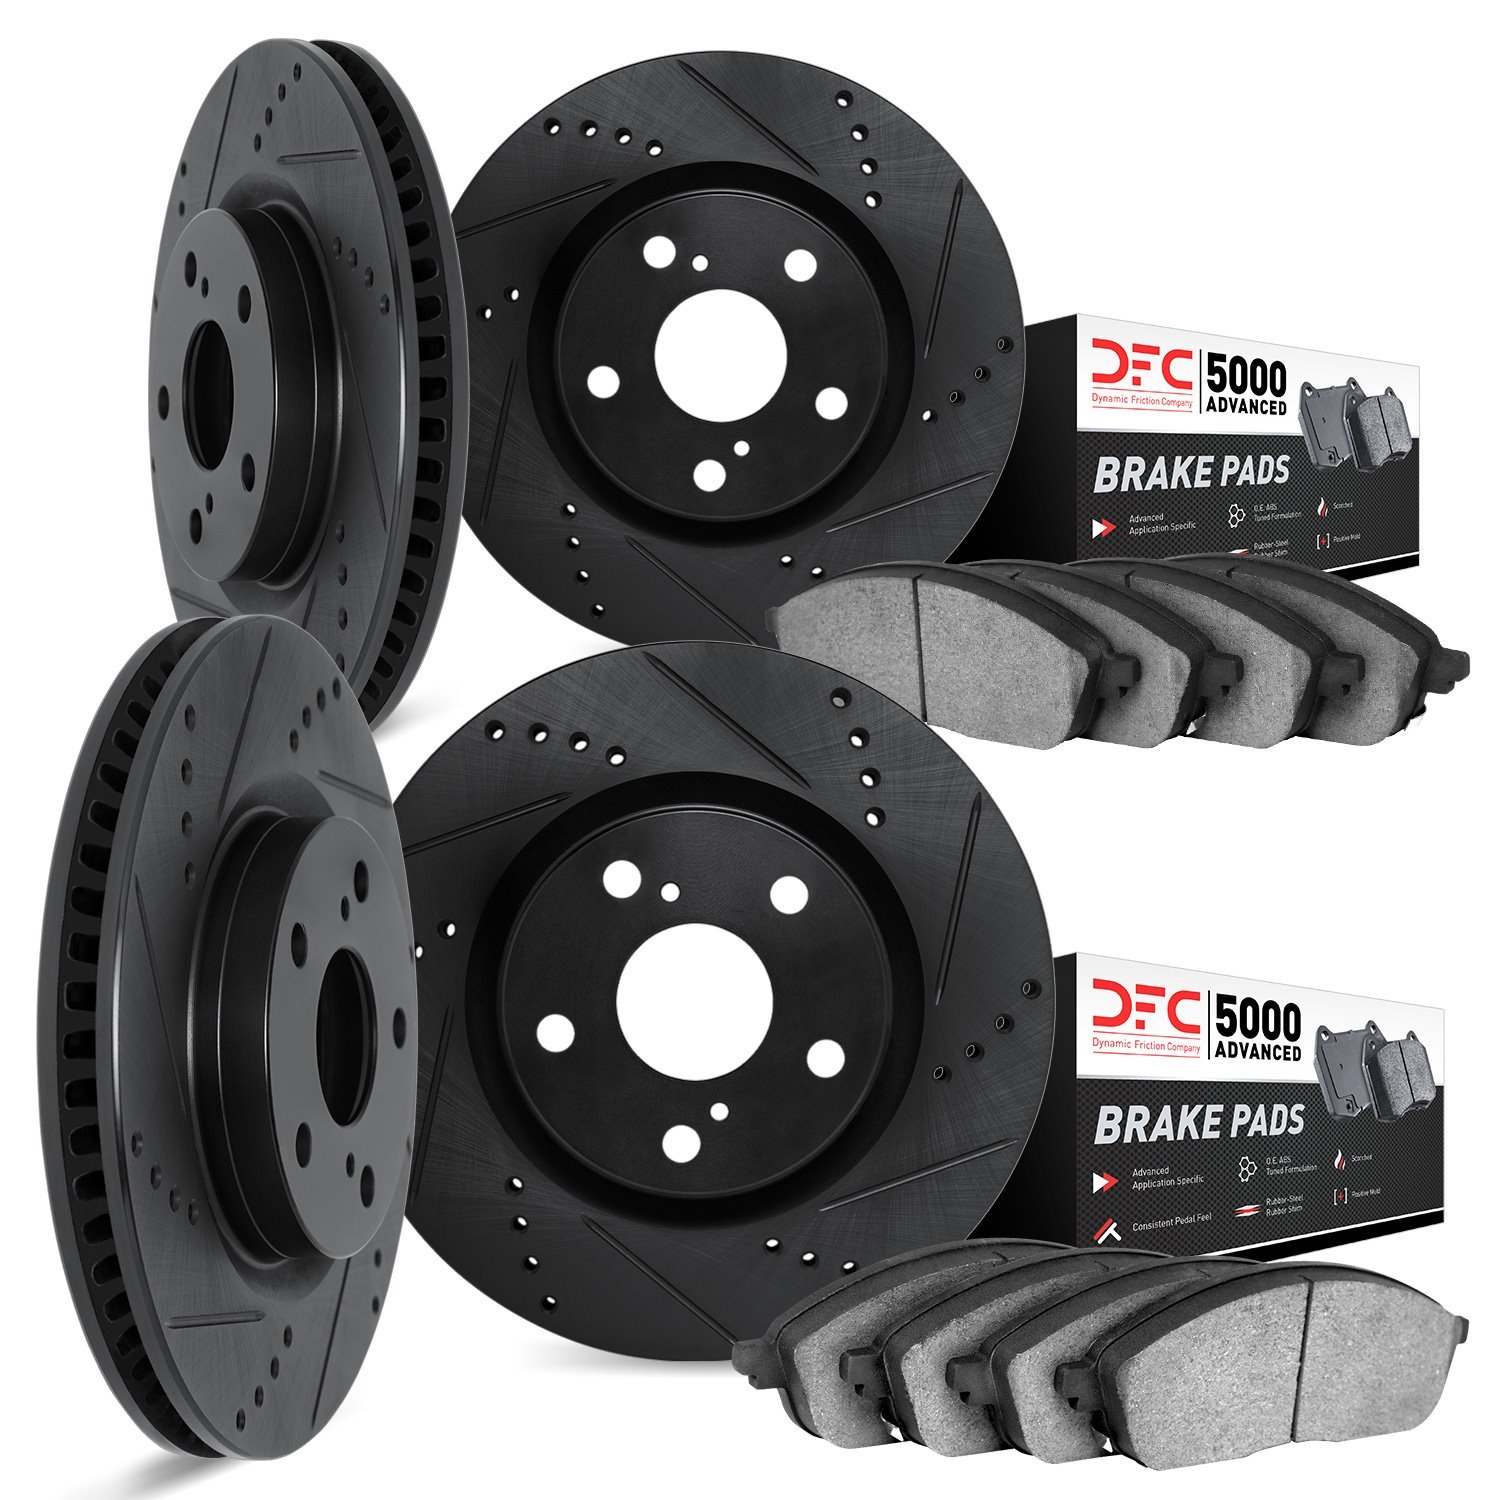 8504-46041 Drilled/Slotted Brake Rotors w/5000 Advanced Brake Pads Kit [Black], 2016-2016 GM, Position: Front and Rear